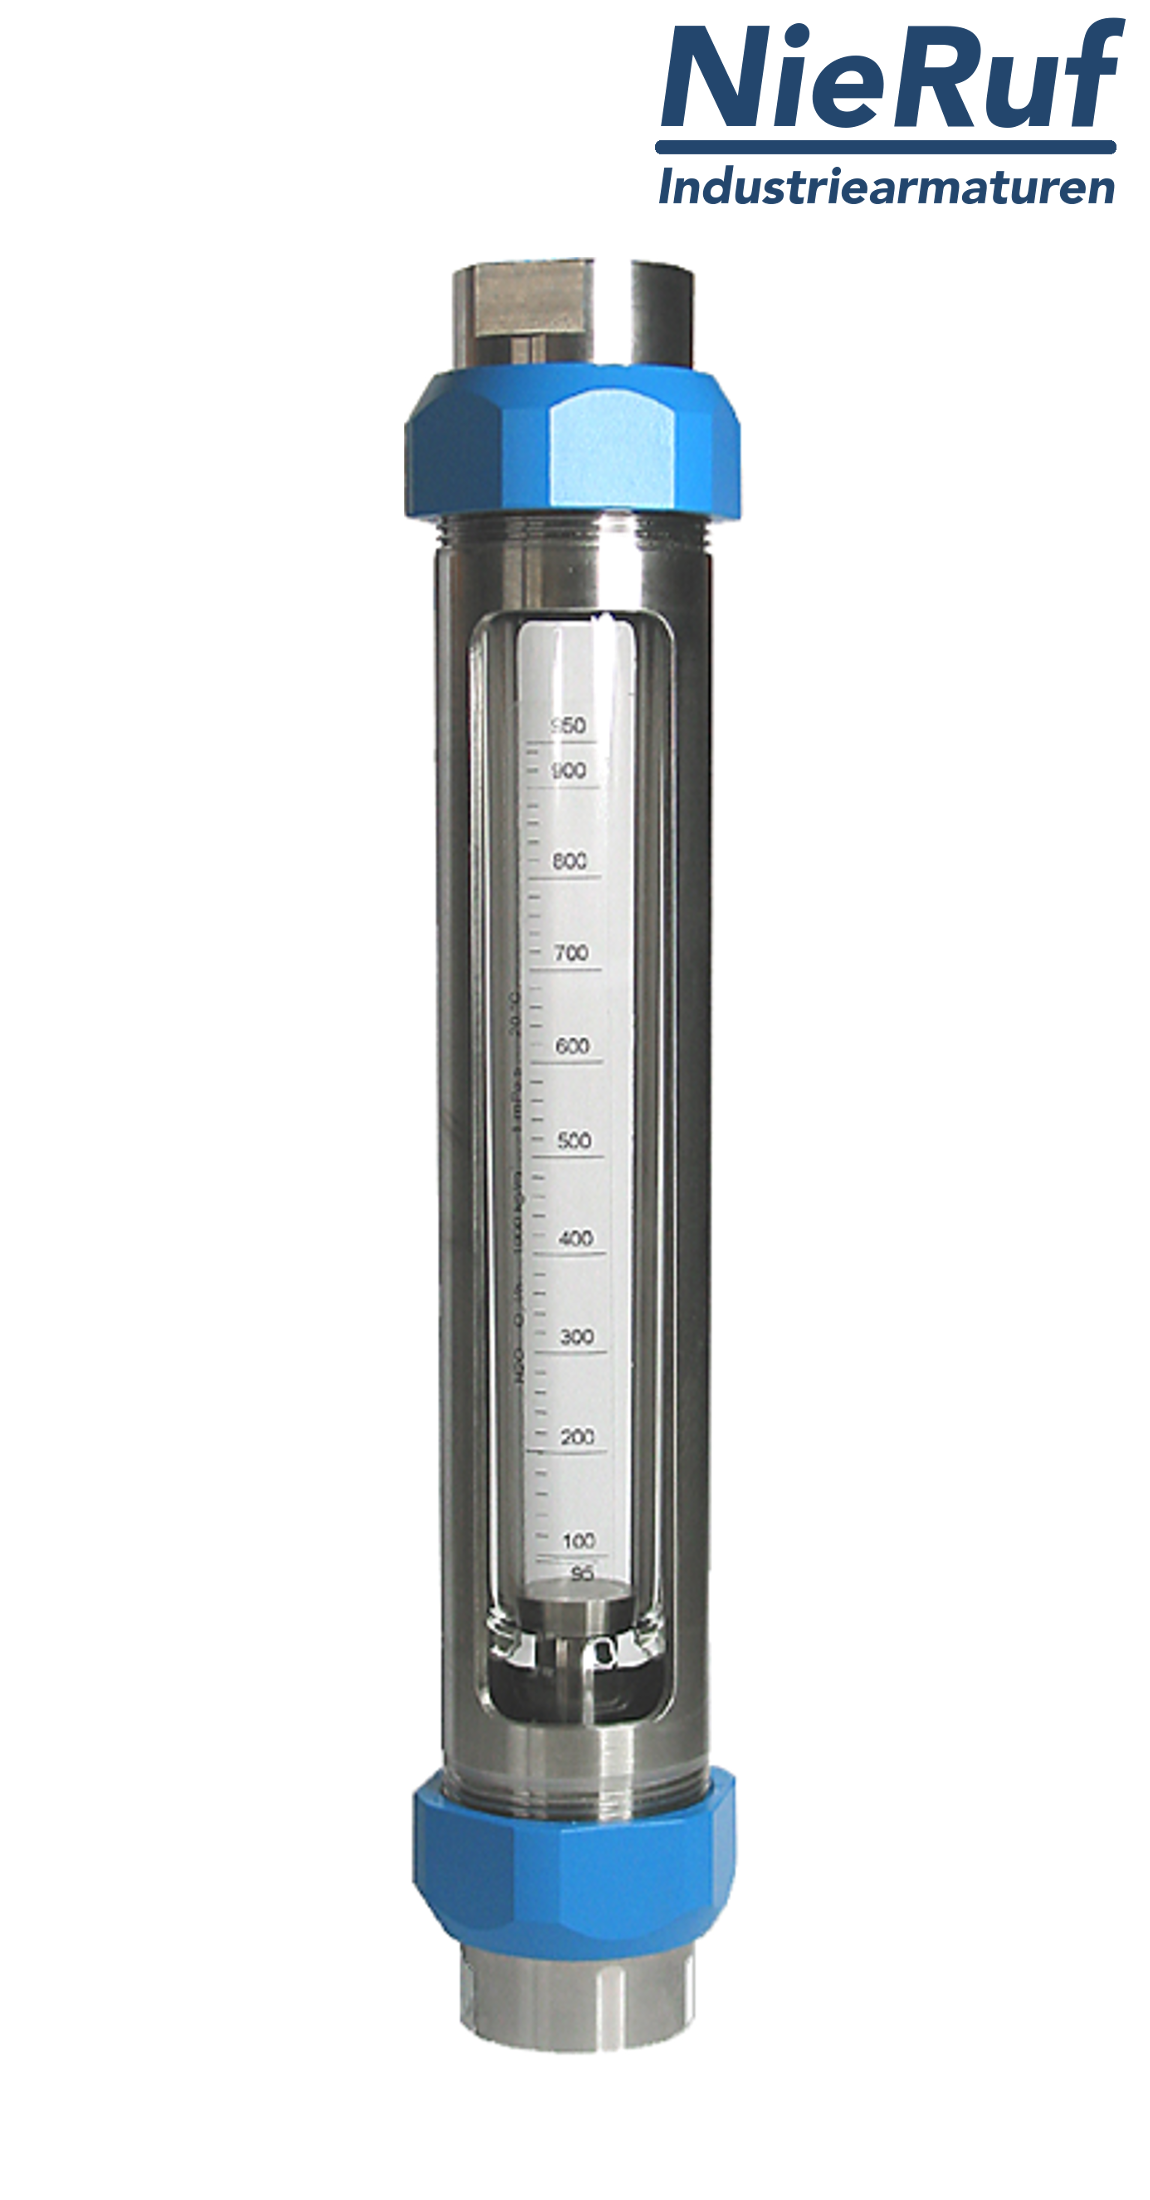 Variable area flowmeter stainless steel + borosilicate 3/4" inch 125.0 - 1250 l/h water FKM